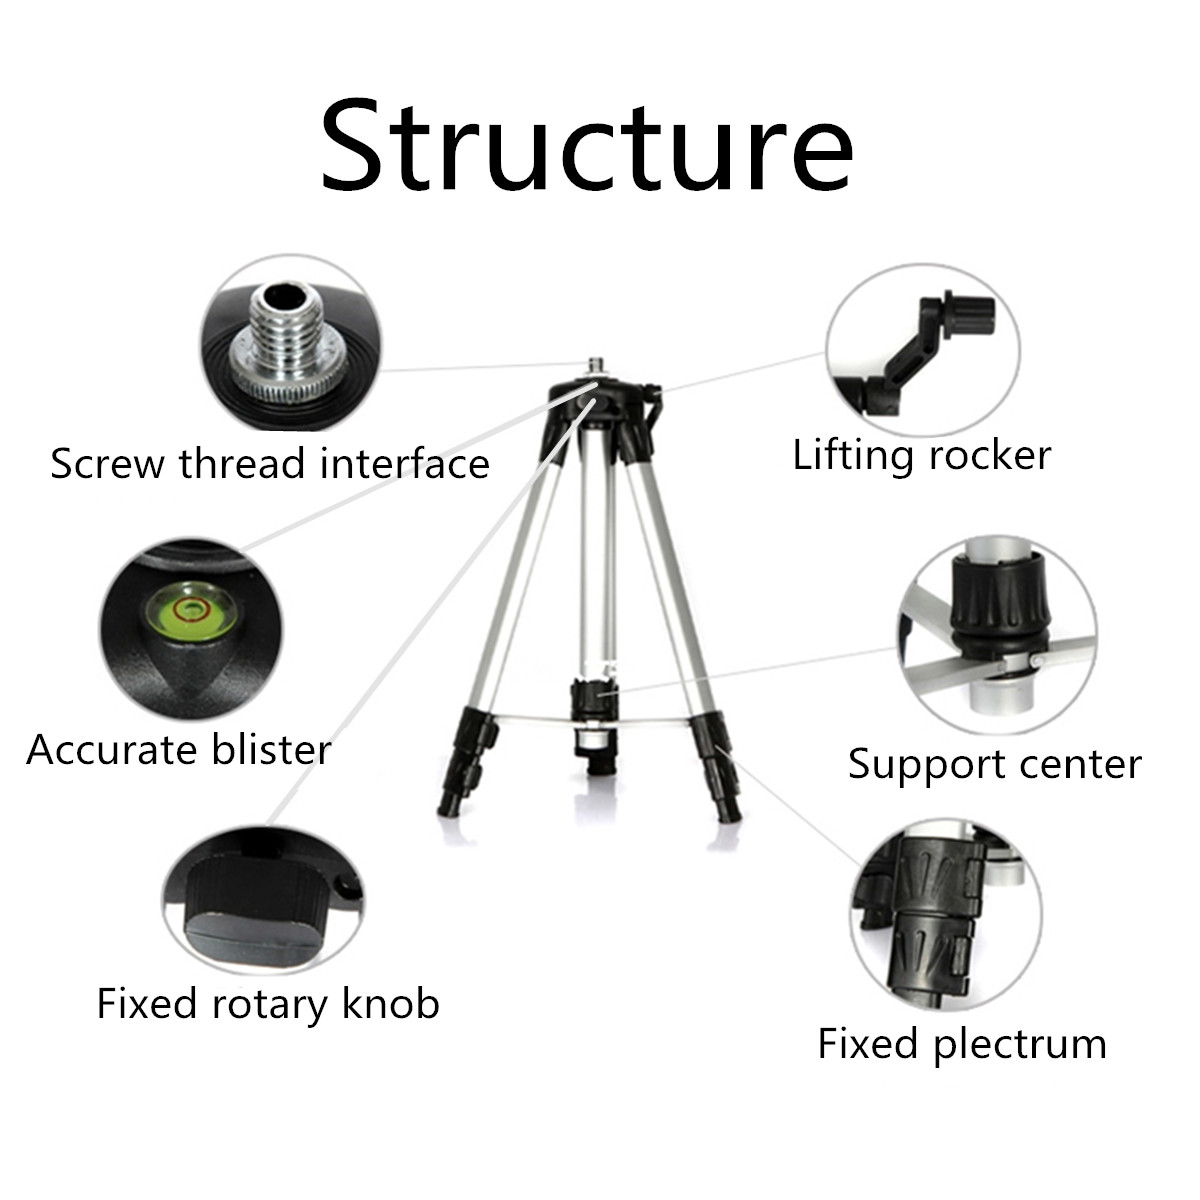 Green-3-Line-4-Points-Laser-Level-360-Rotary-Laser-Line-Self-Leveling-with-Tripod-1166737-6